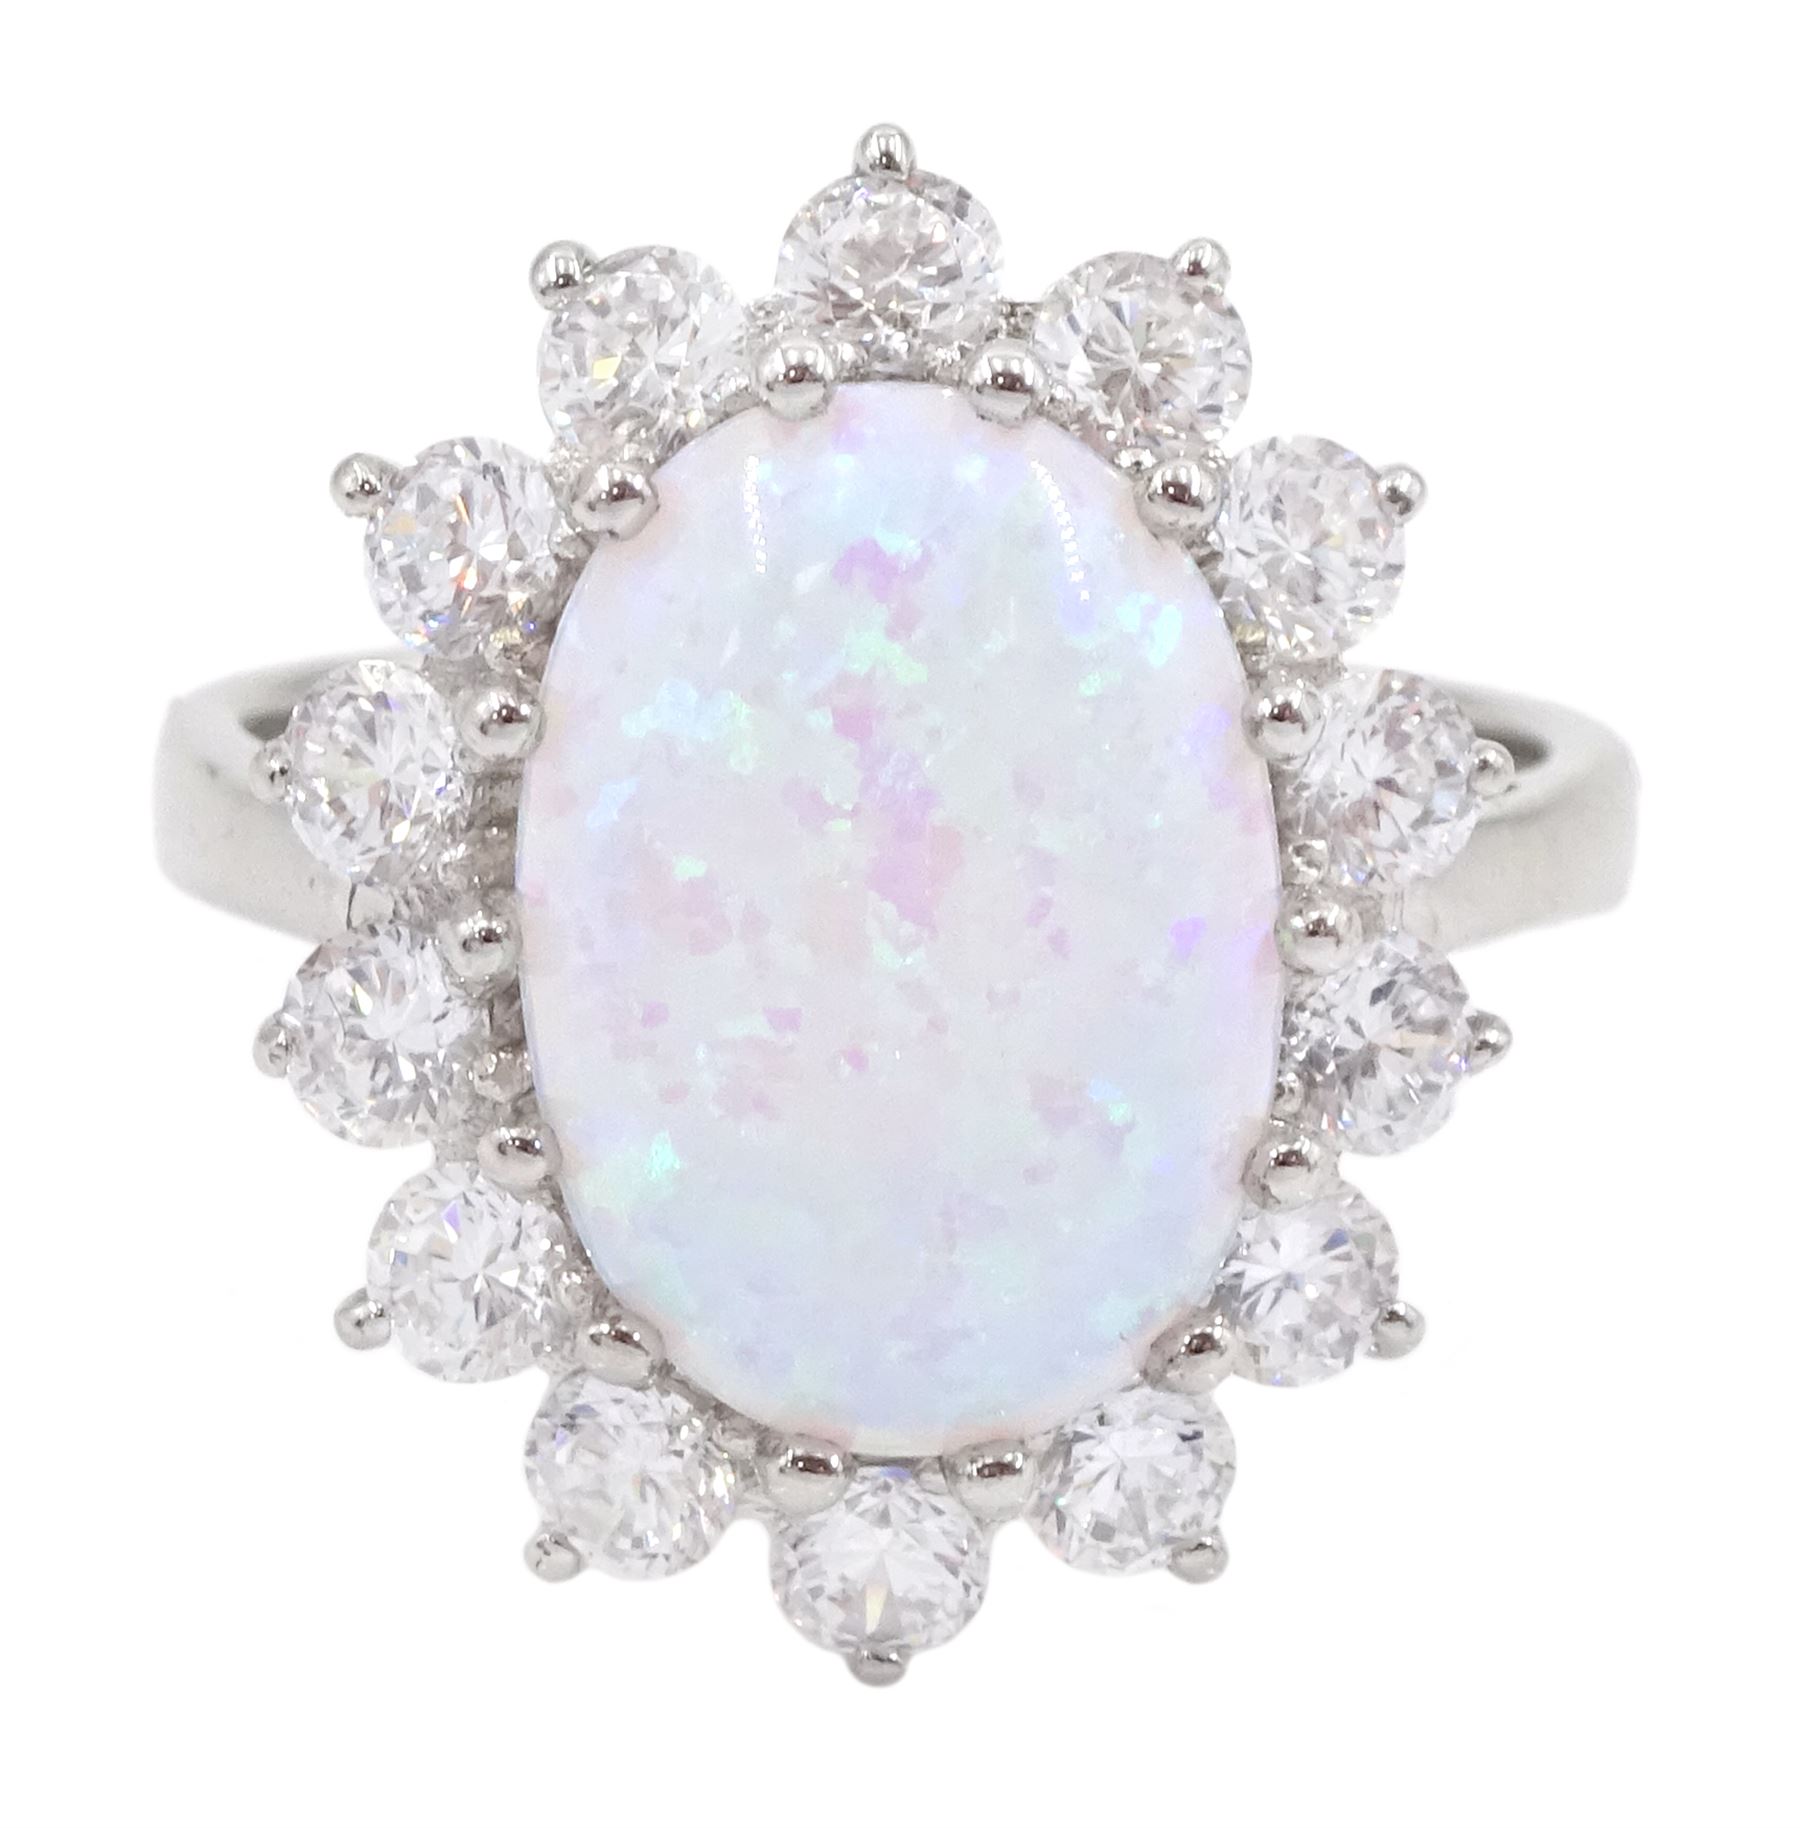 Silver opal and cubic zirconia cluster ring - Image 5 of 5